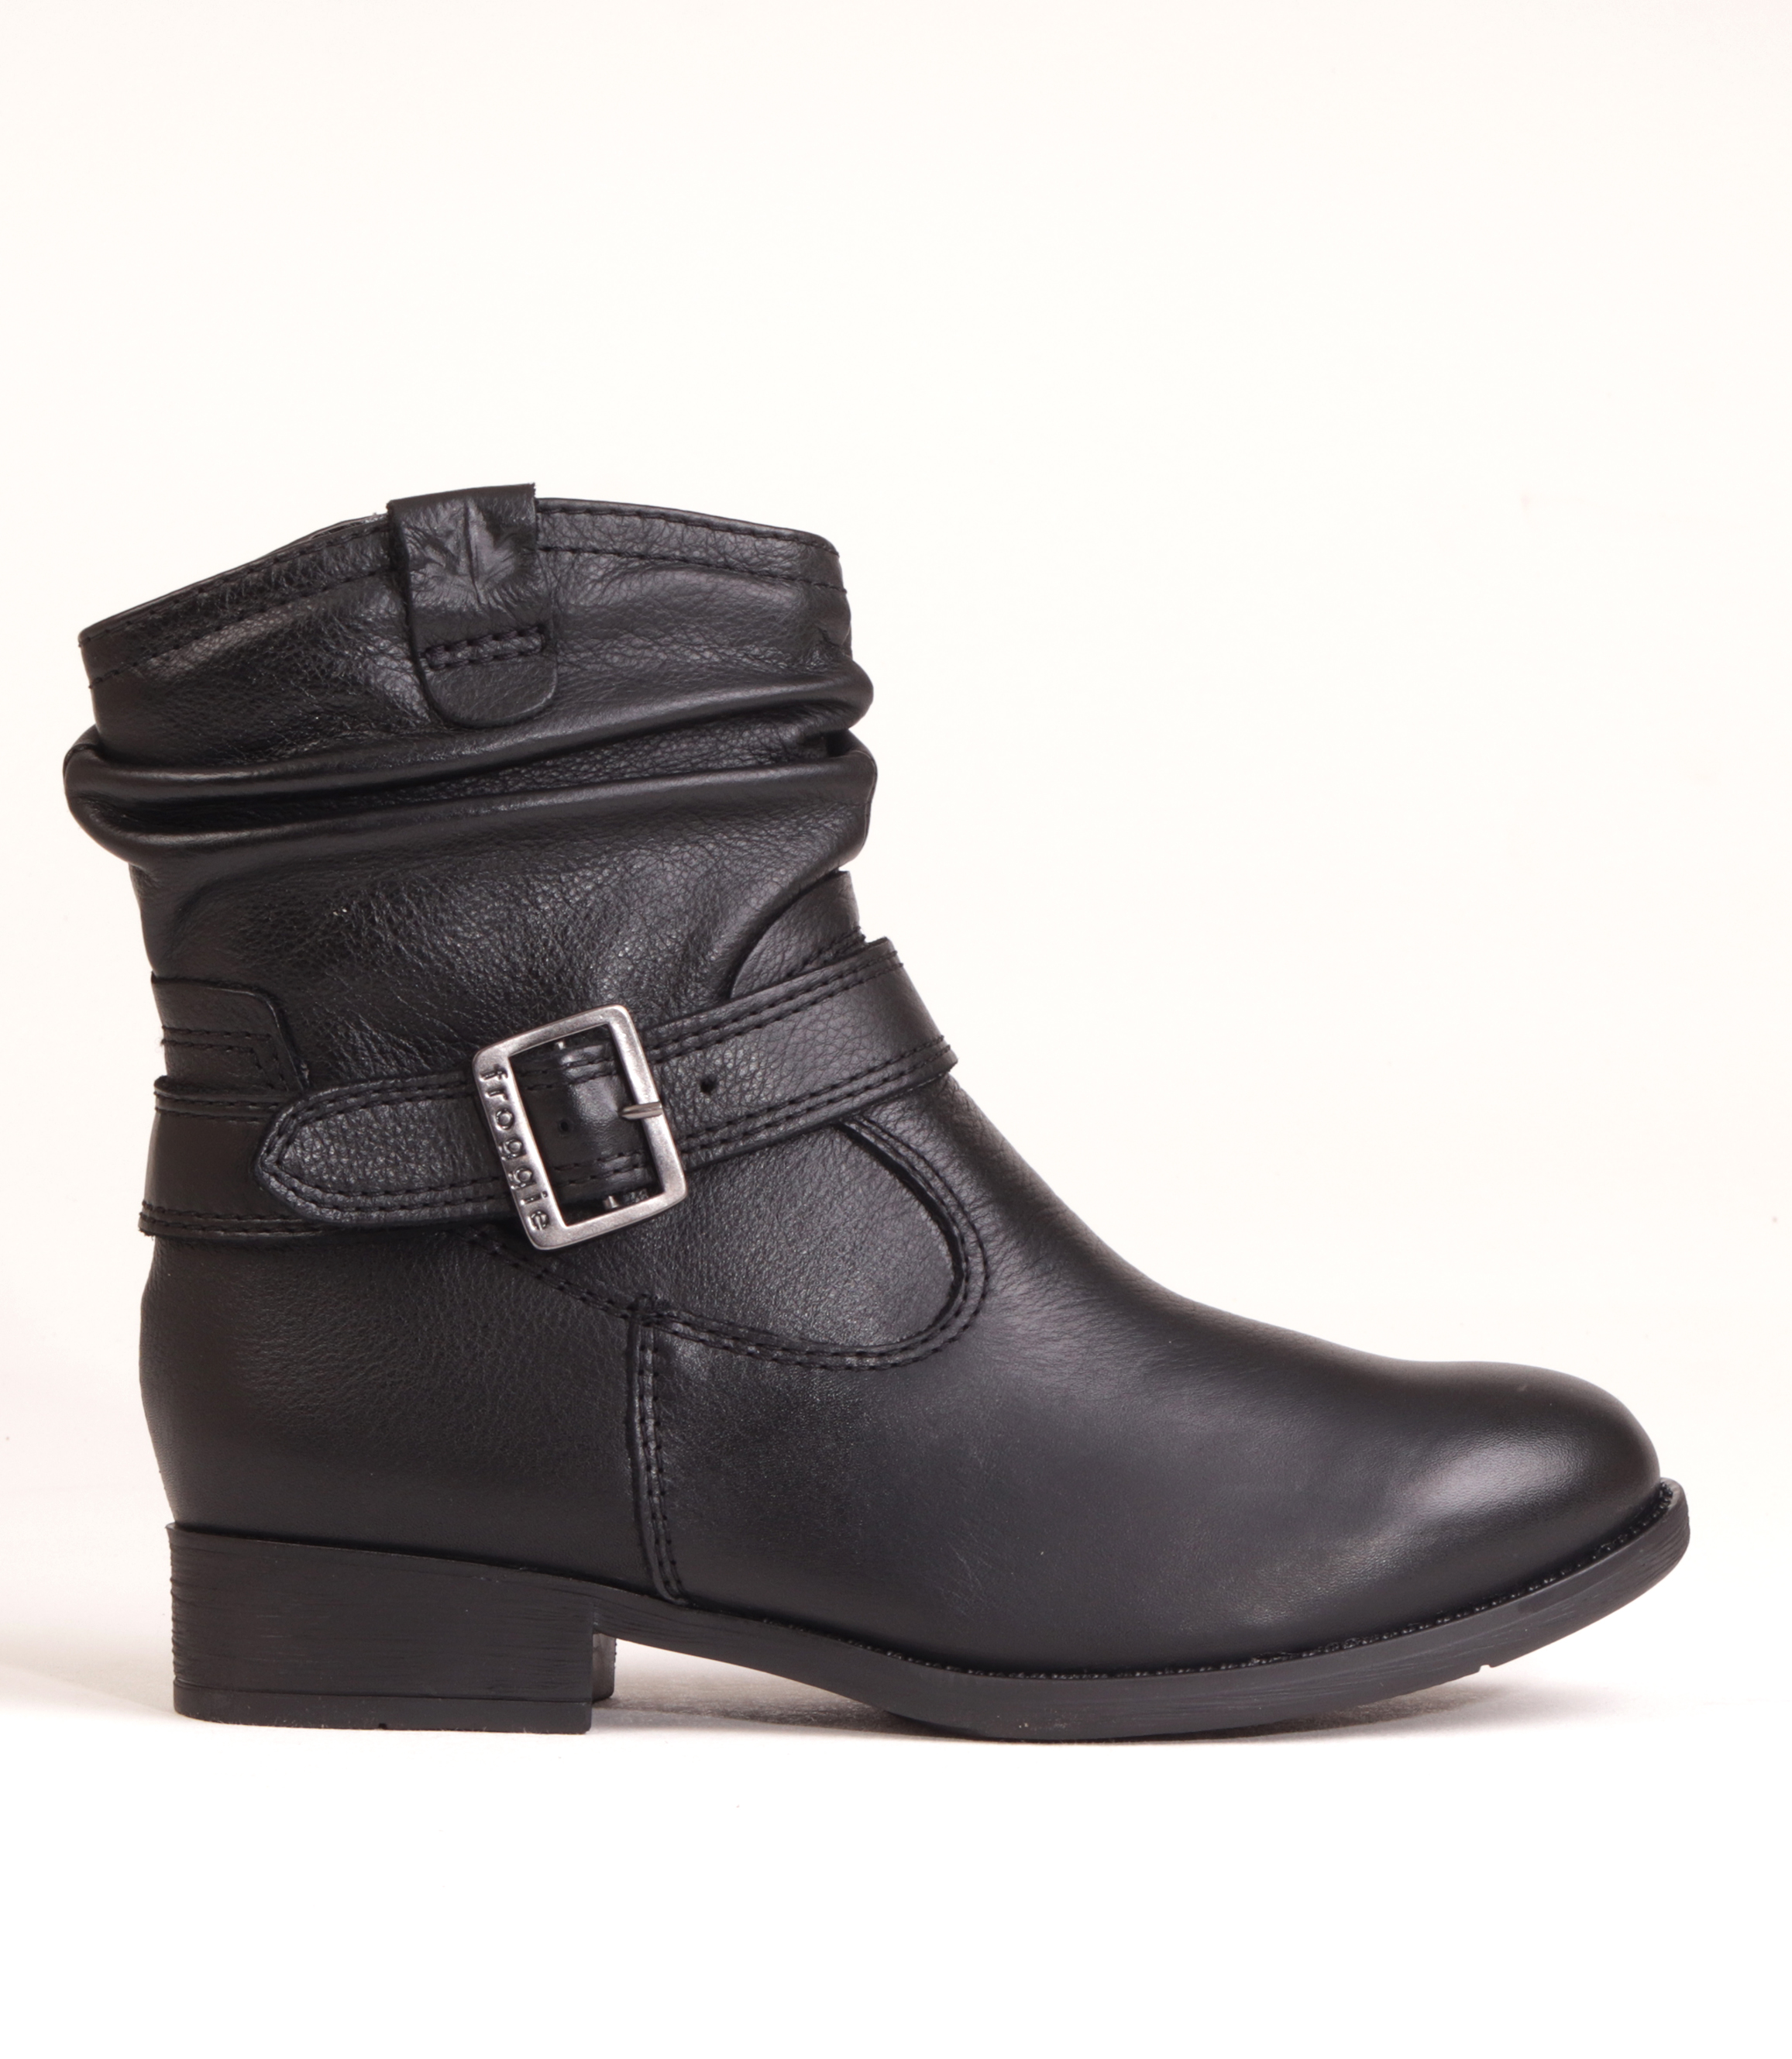 FROGGIE BLACK LEATHER RUCHED BUCKLE BOOT | Rosella - Style inspired by ...